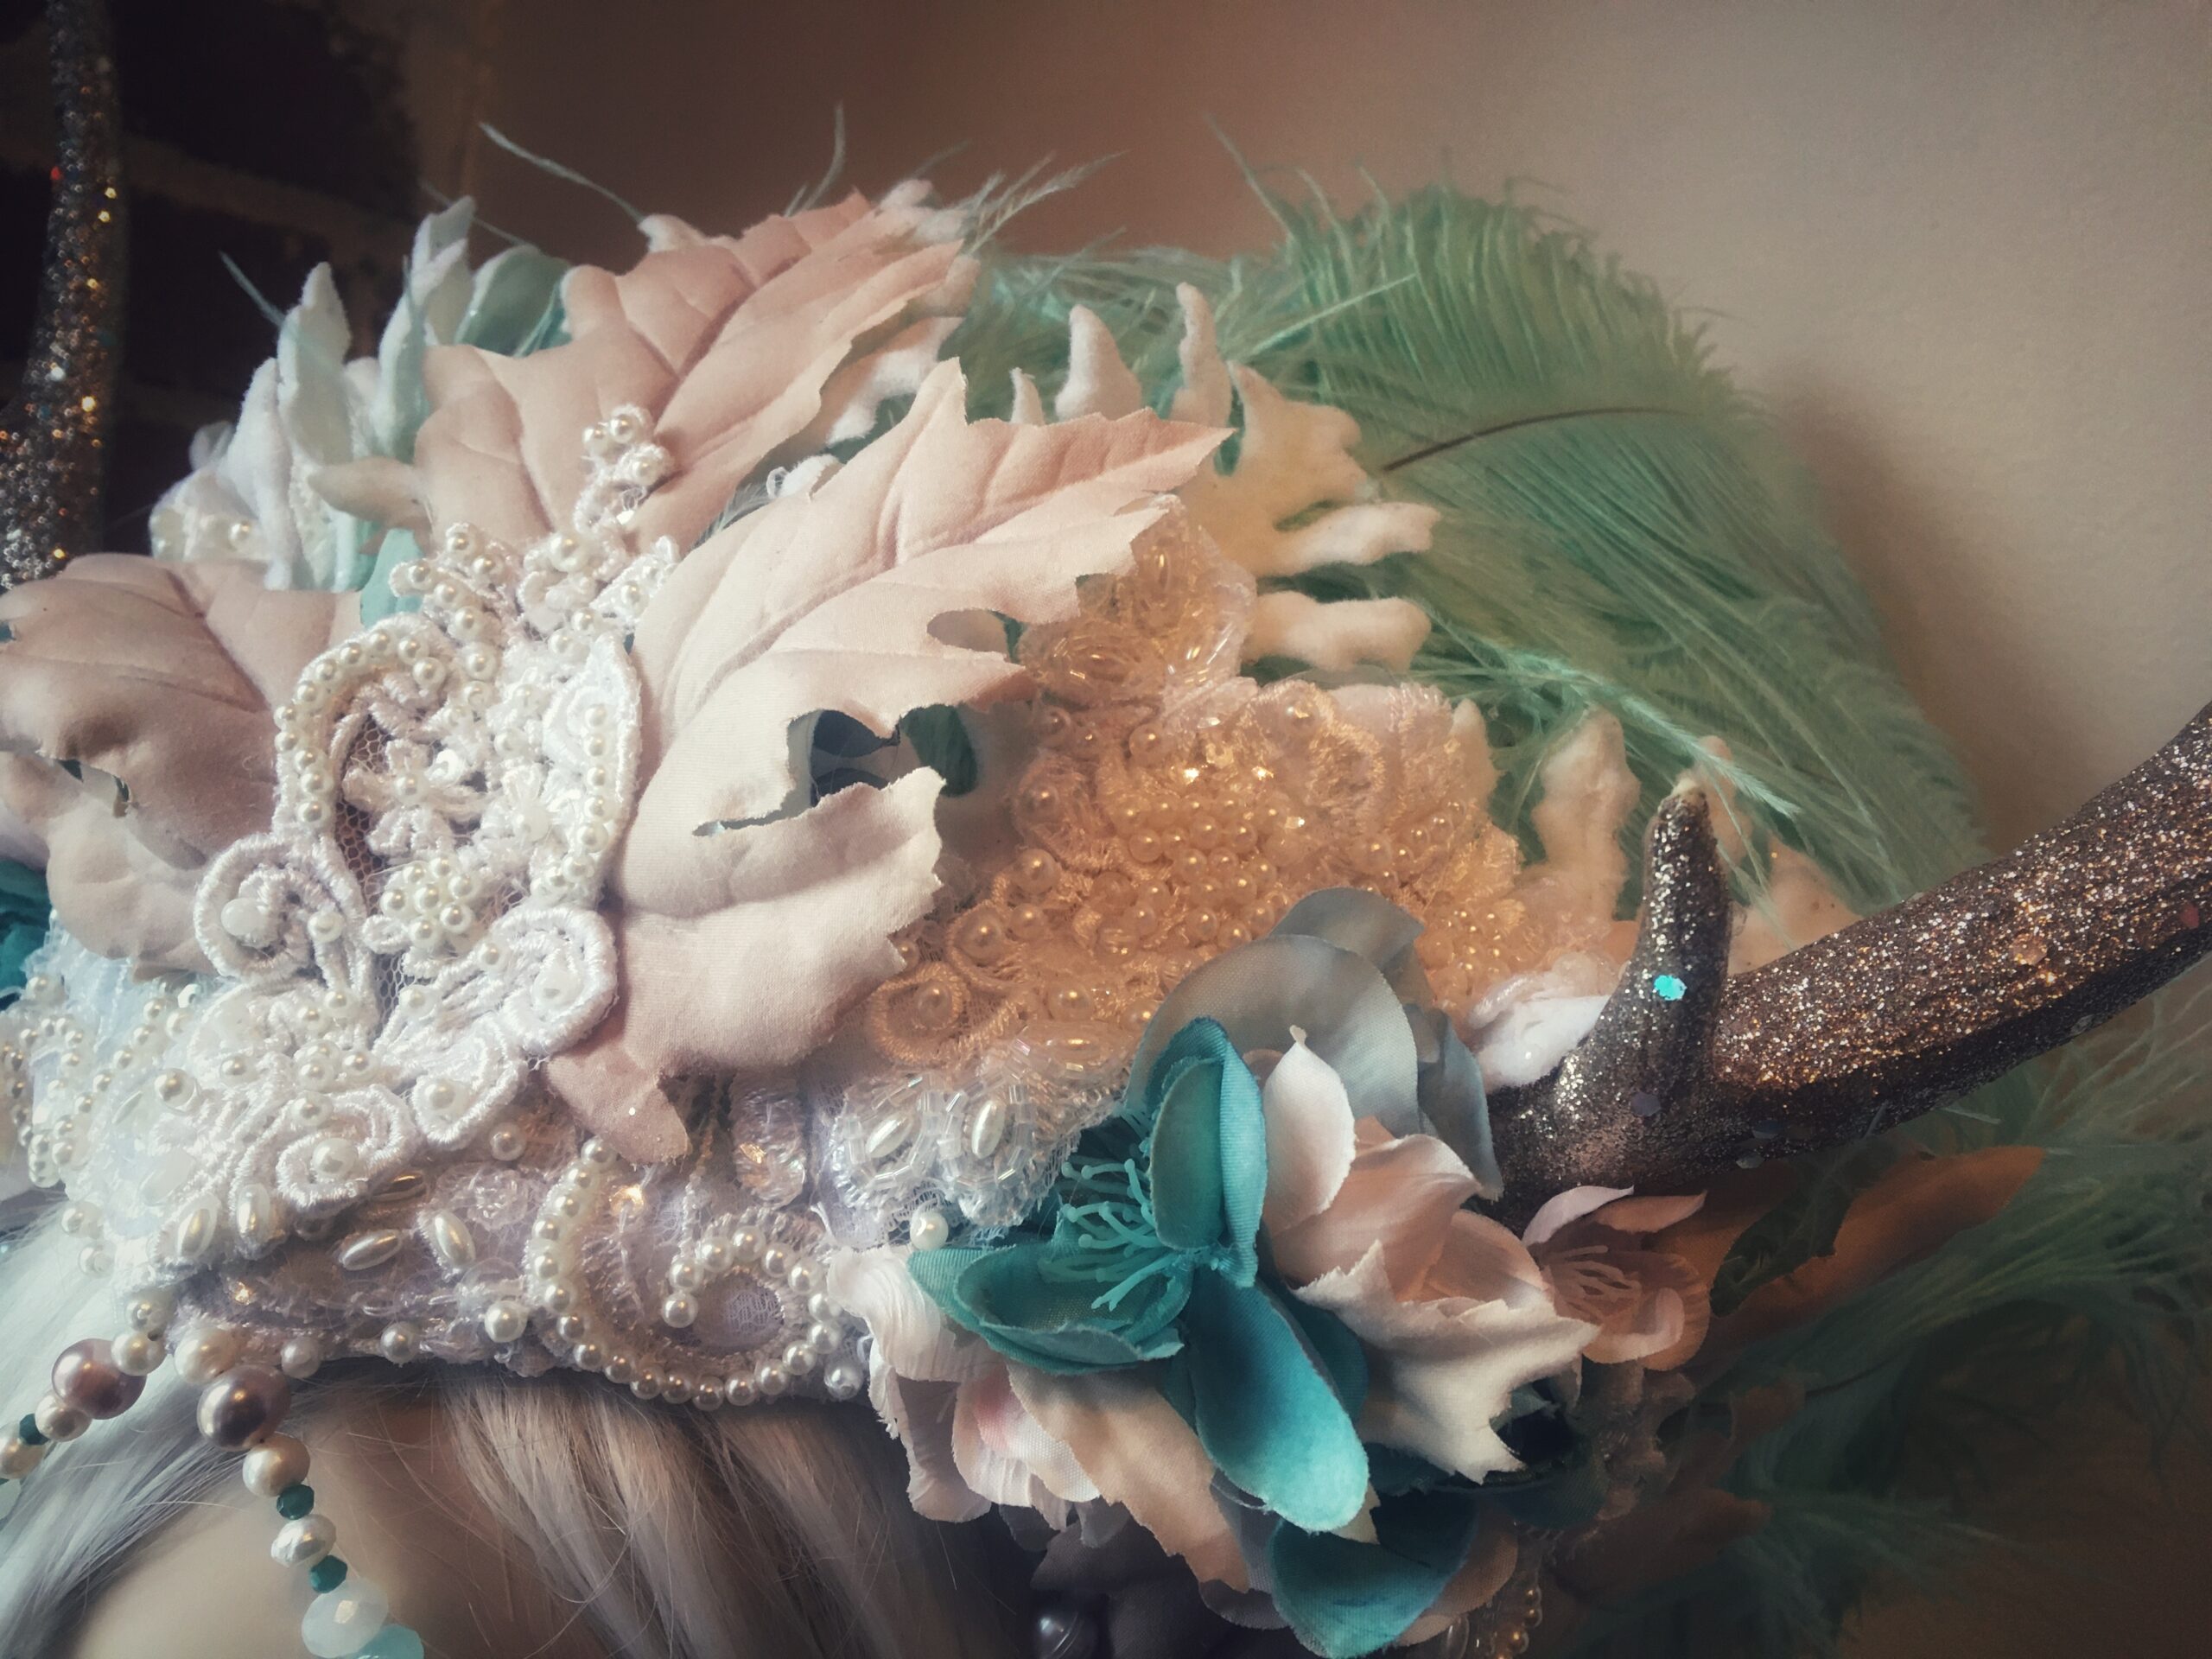 Gold Wings & Filigree Headdress : Made to order - Serpentfeathers